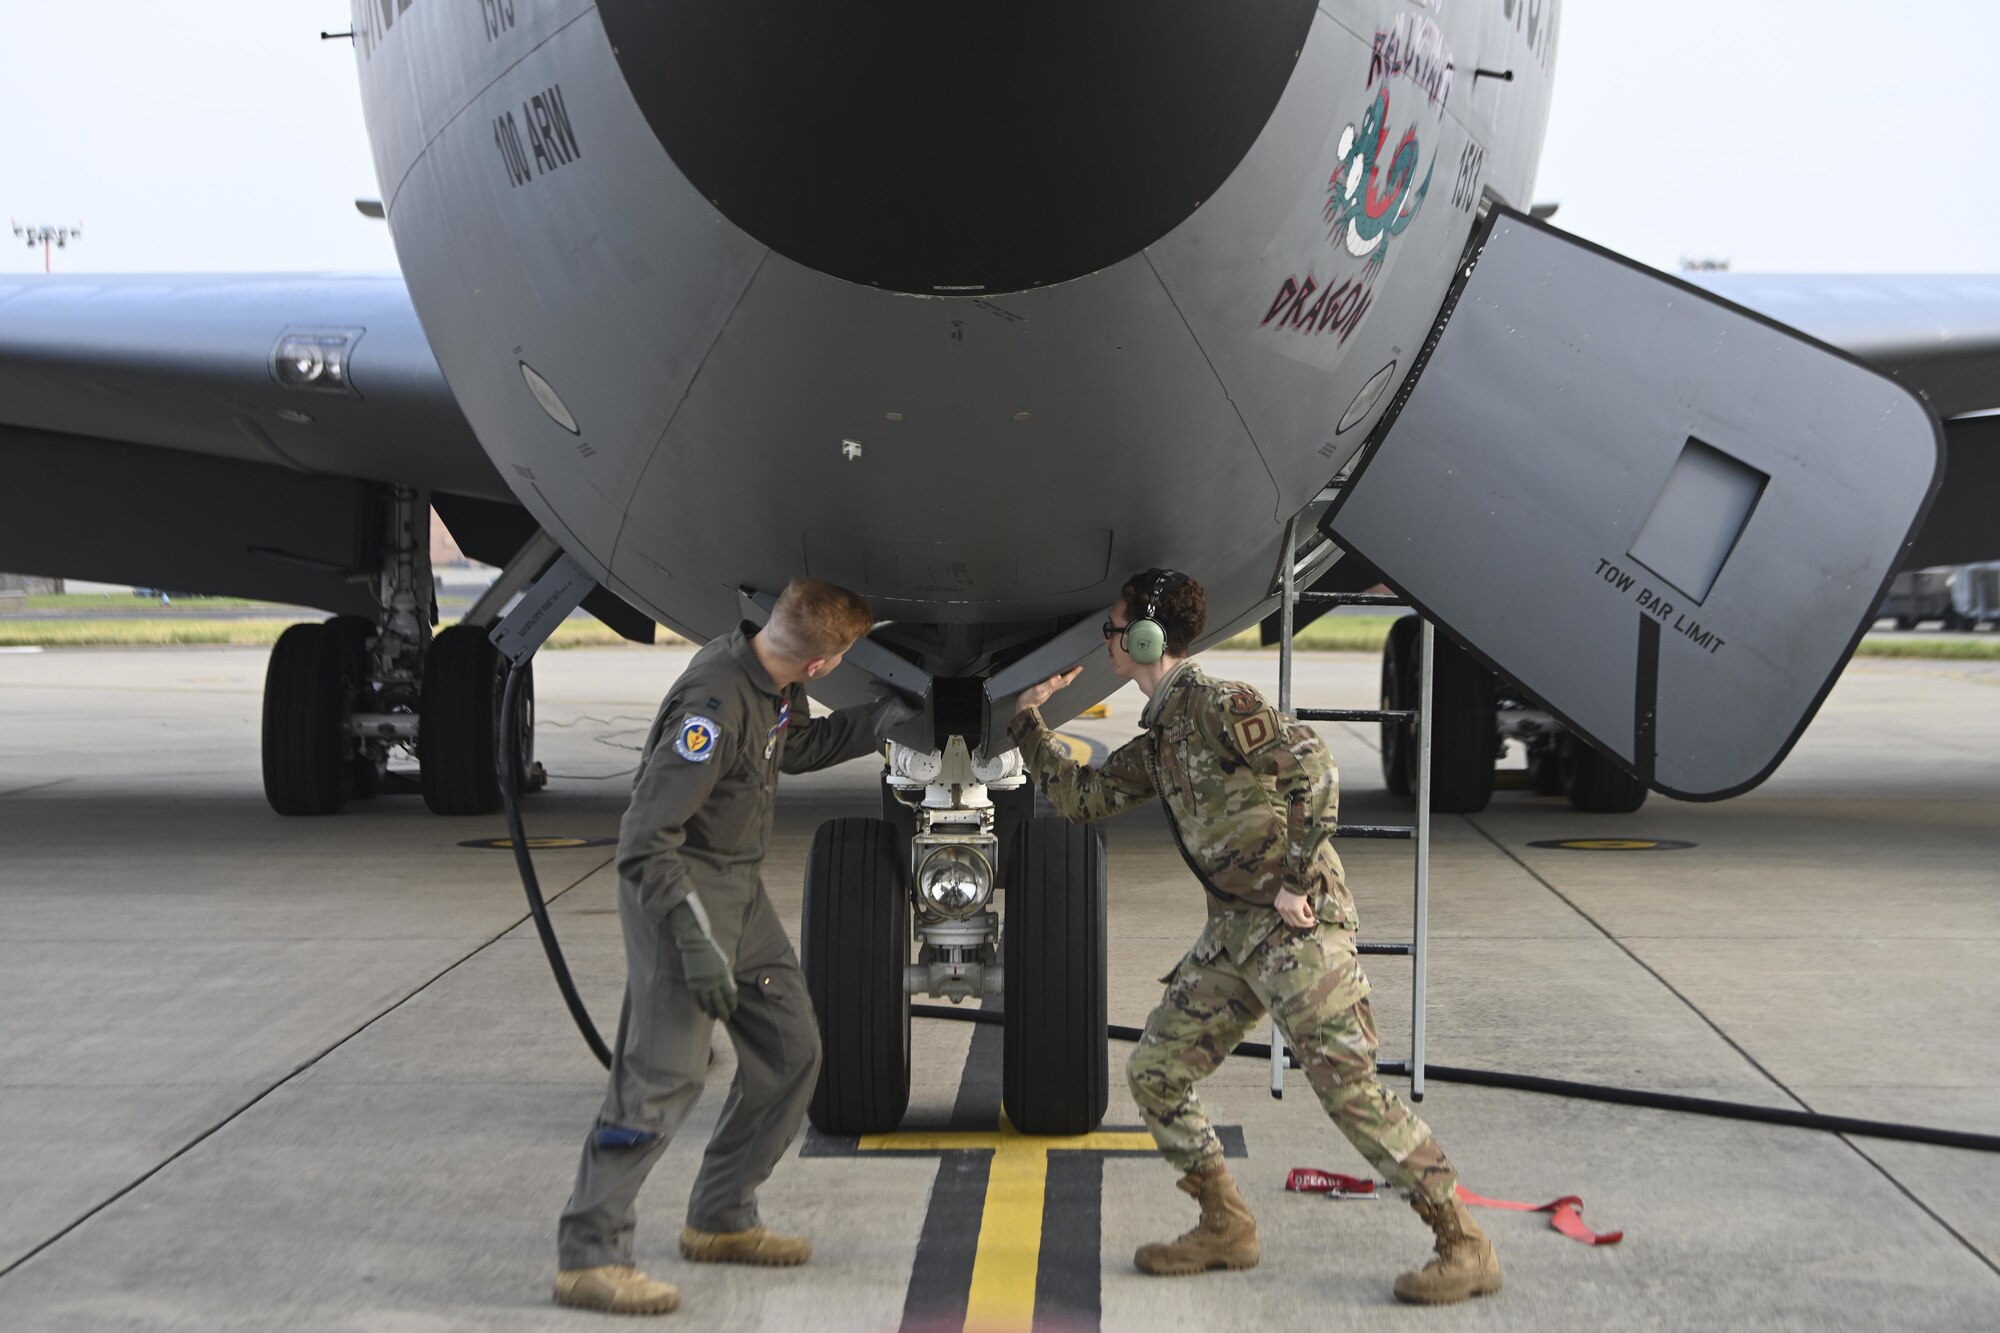 U.S. Air Force Capt. William Carroll, 351st Air Refueling Squadron pilot, left, and an Airman assigned to the 100th Aircraft Maintenance Squadron push an aircraft panel into place before flight at Royal Air Force Mildenhall, England, July 27, 2021. The 100th Air Refueling Wing provides the critical air refueling “bridge” that allows the Air Force to deploy around the globe at a moment’s notice. (U.S. Air Force photo by Senior Airman Joseph Barron)